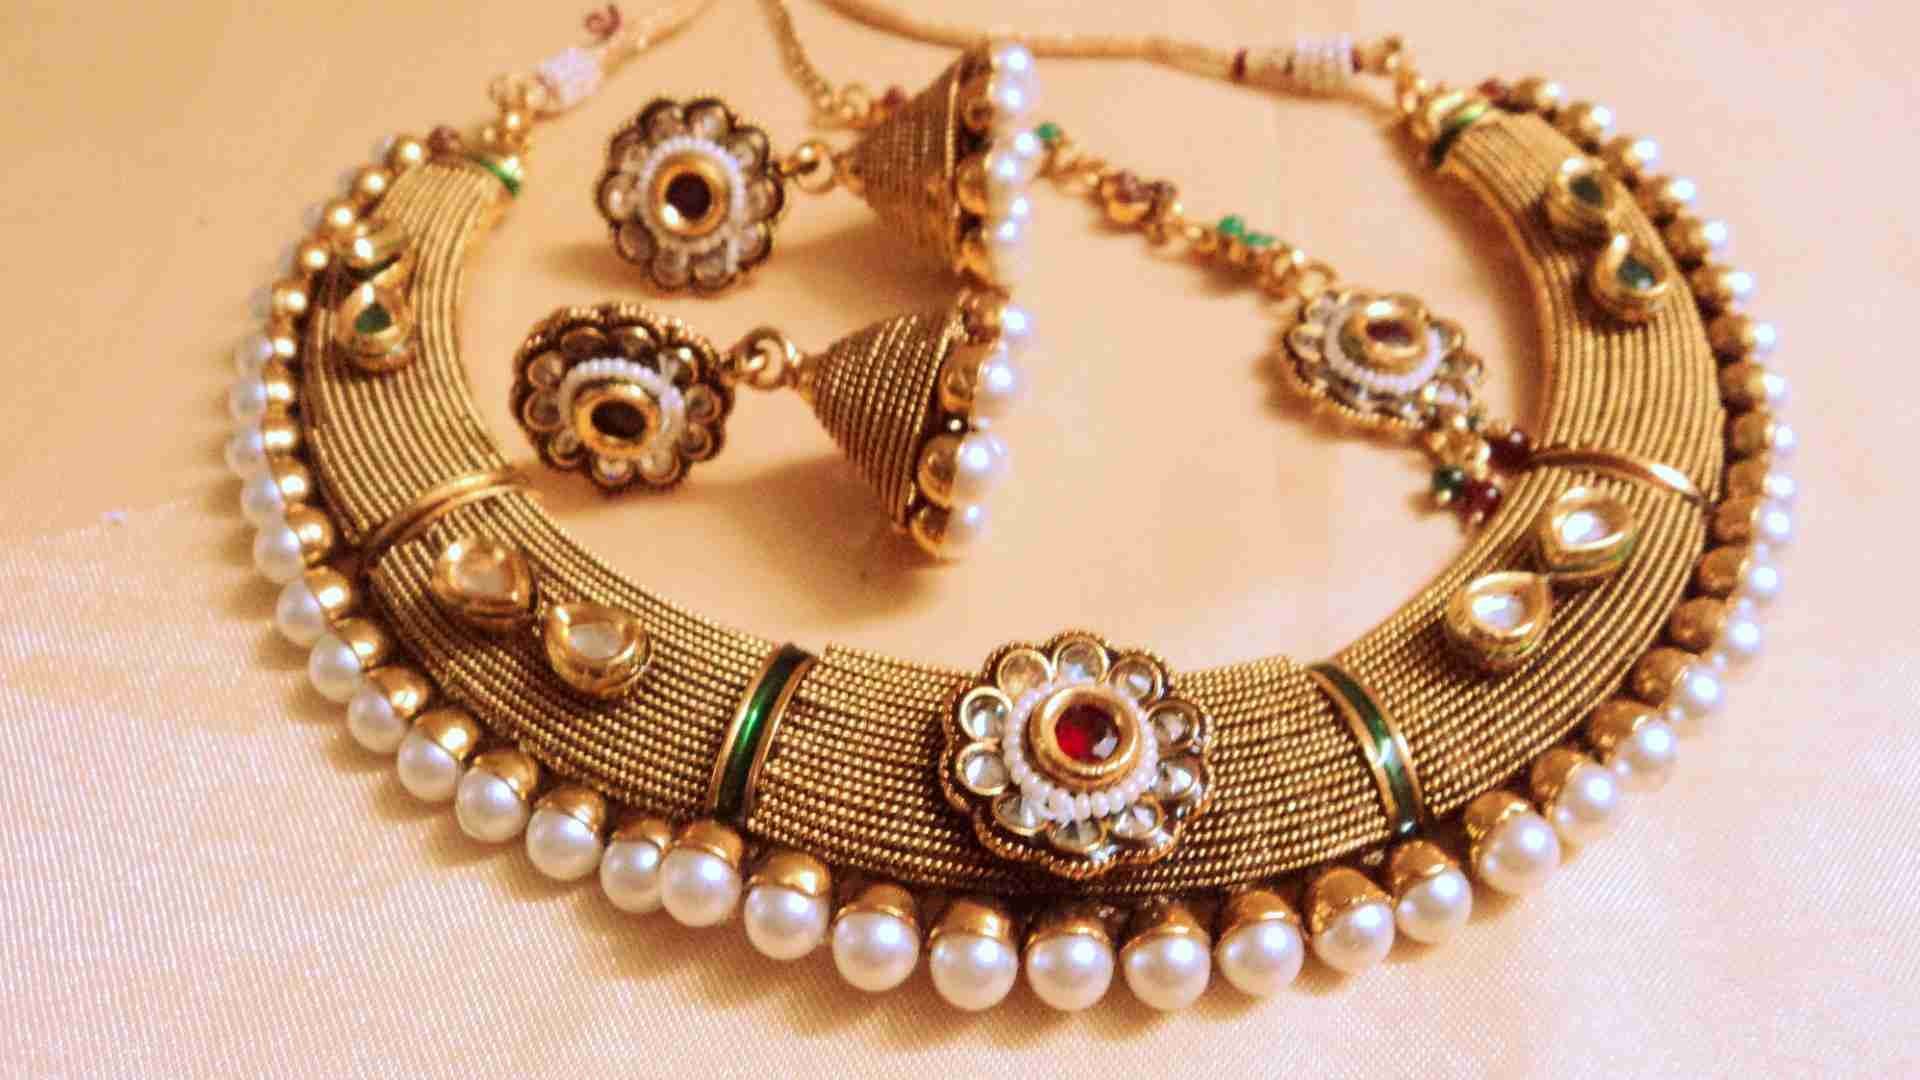 1920x1080 38 Upcoming Events For Jewellery In Mumbai - Events, Tickets, Outdoors &  Trekking And Camping - Events High